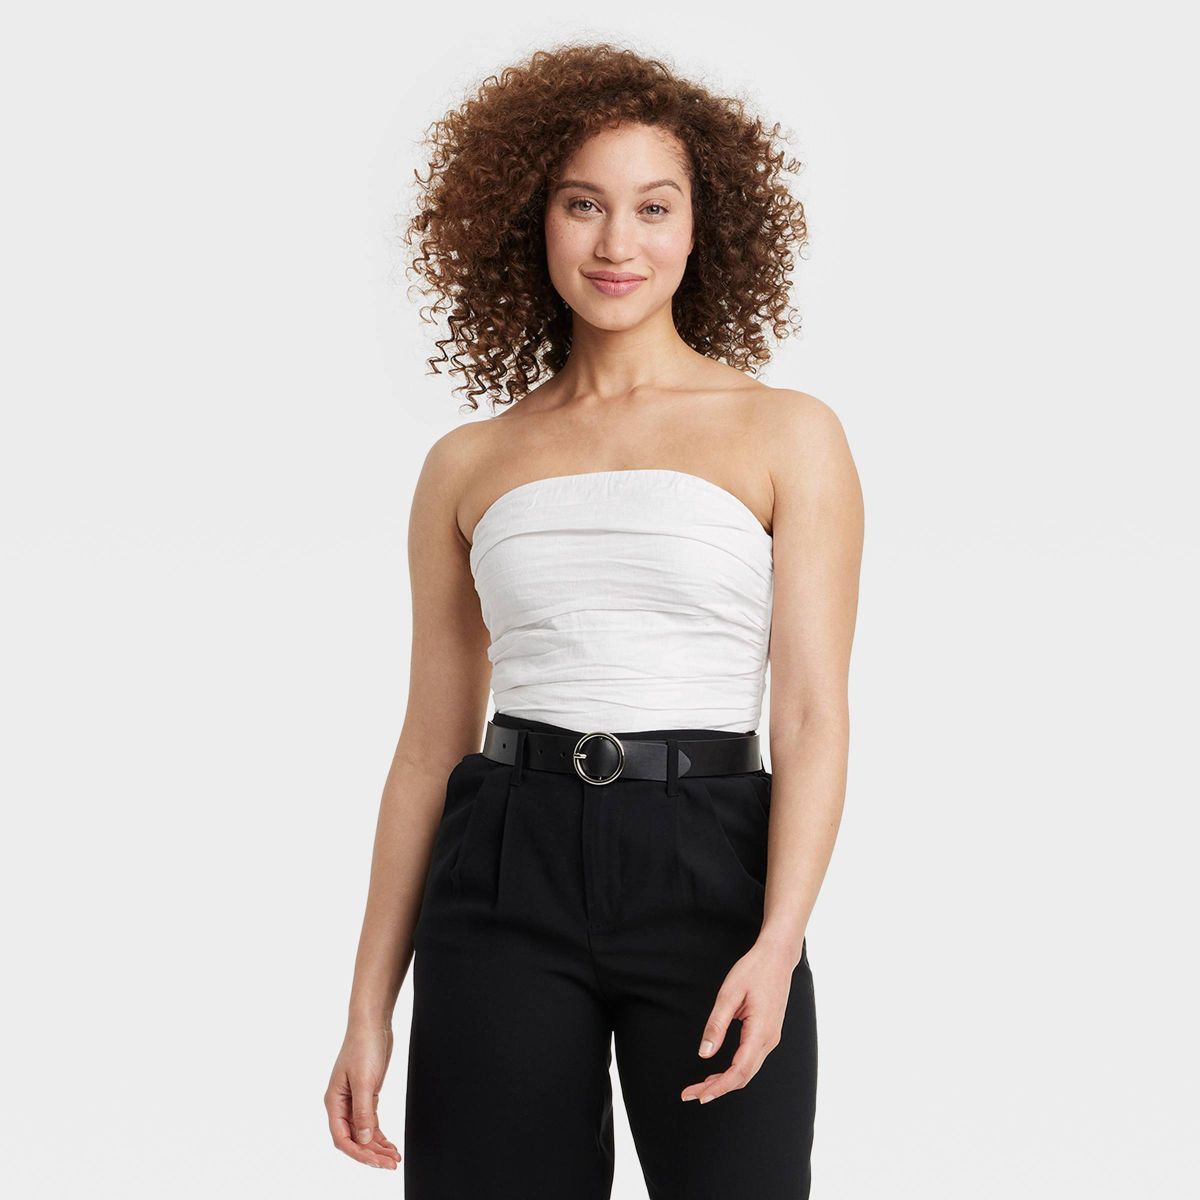 TargetClothing, Shoes & AccessoriesWomen’s ClothingTopsShirts & Blouses | Target